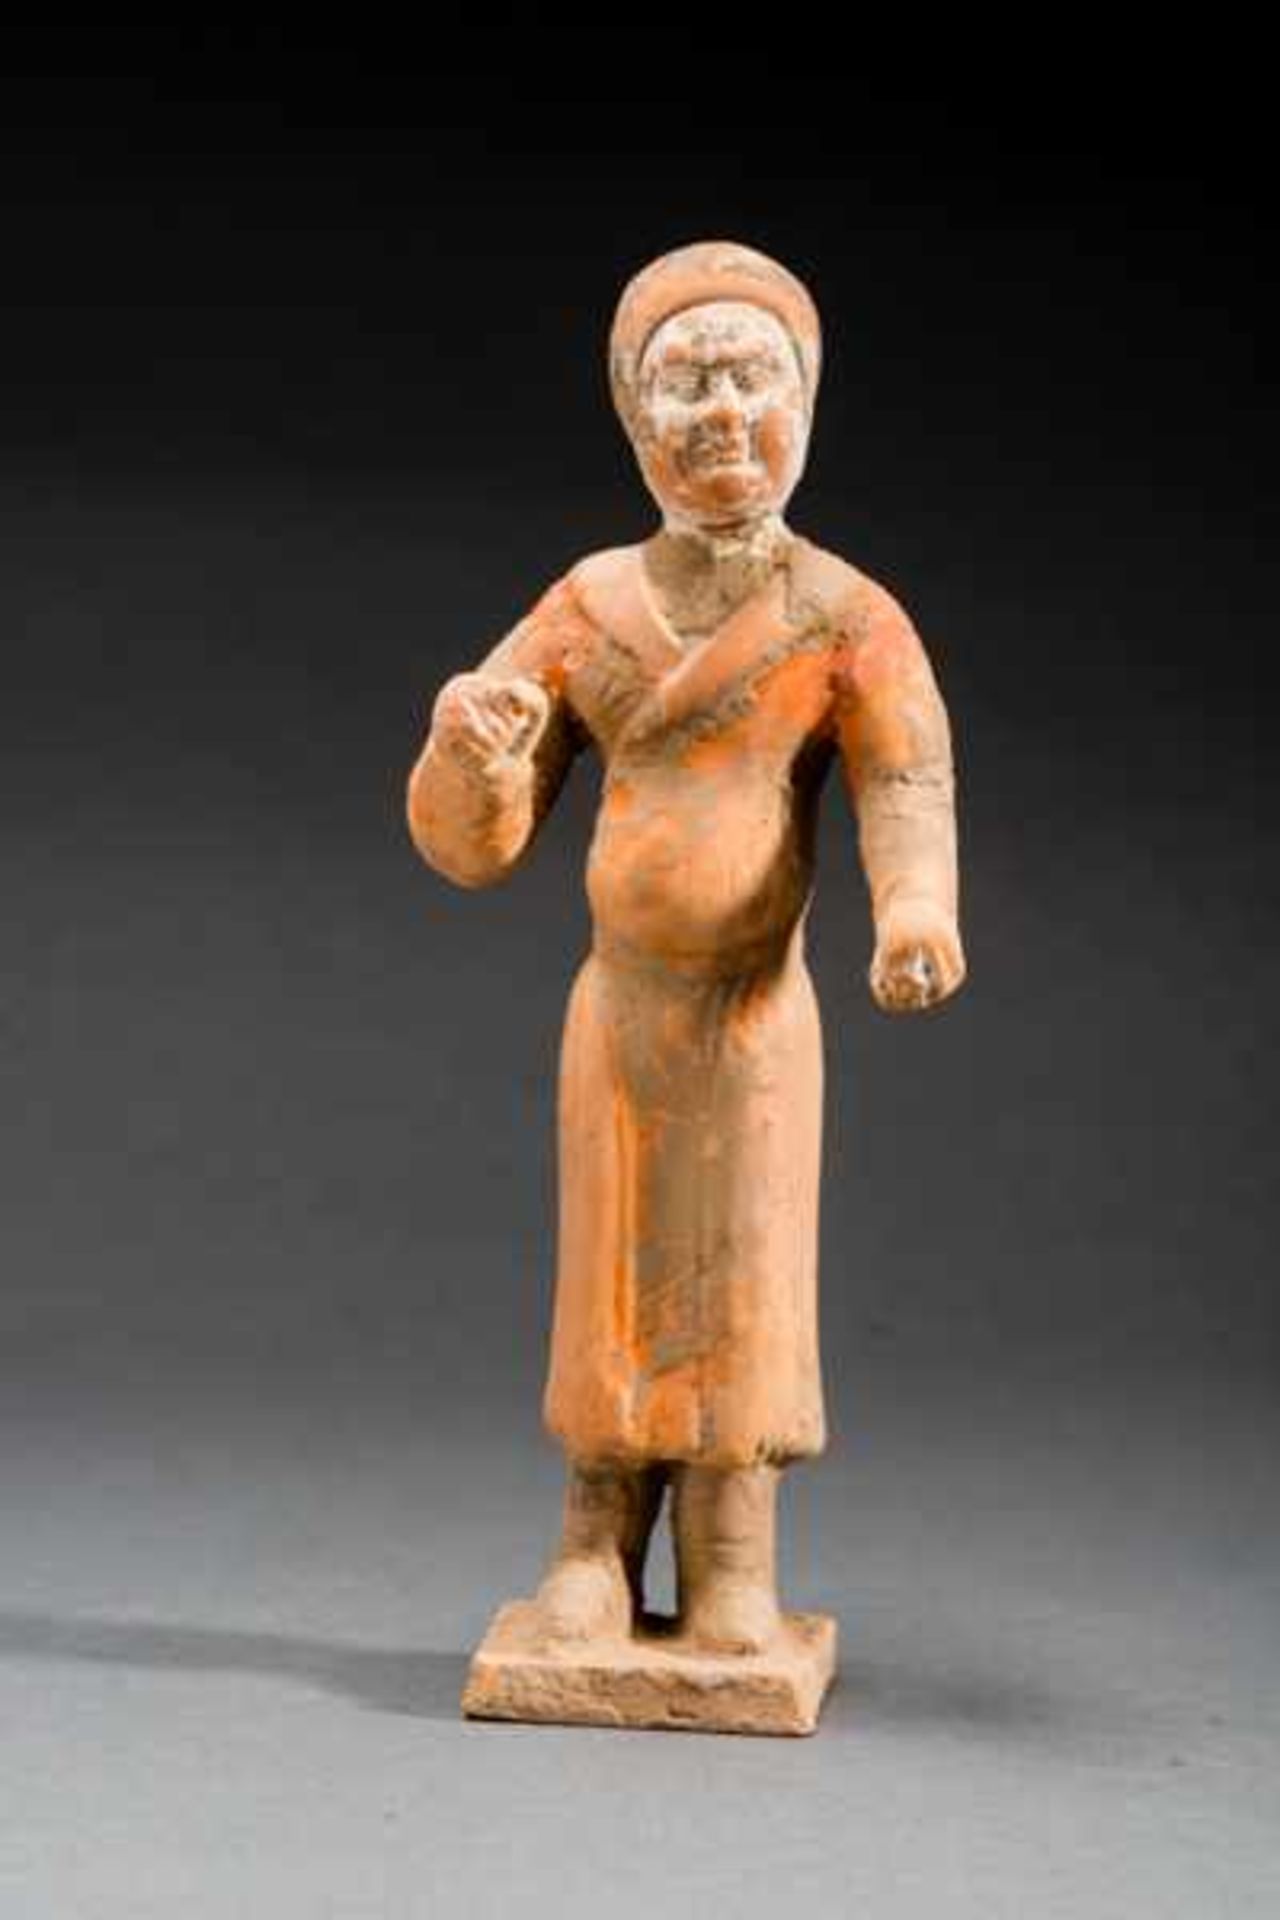 STANDING FIGURE Terracotta with remnants of original painting. China, Six Dynasties (221 - 589)